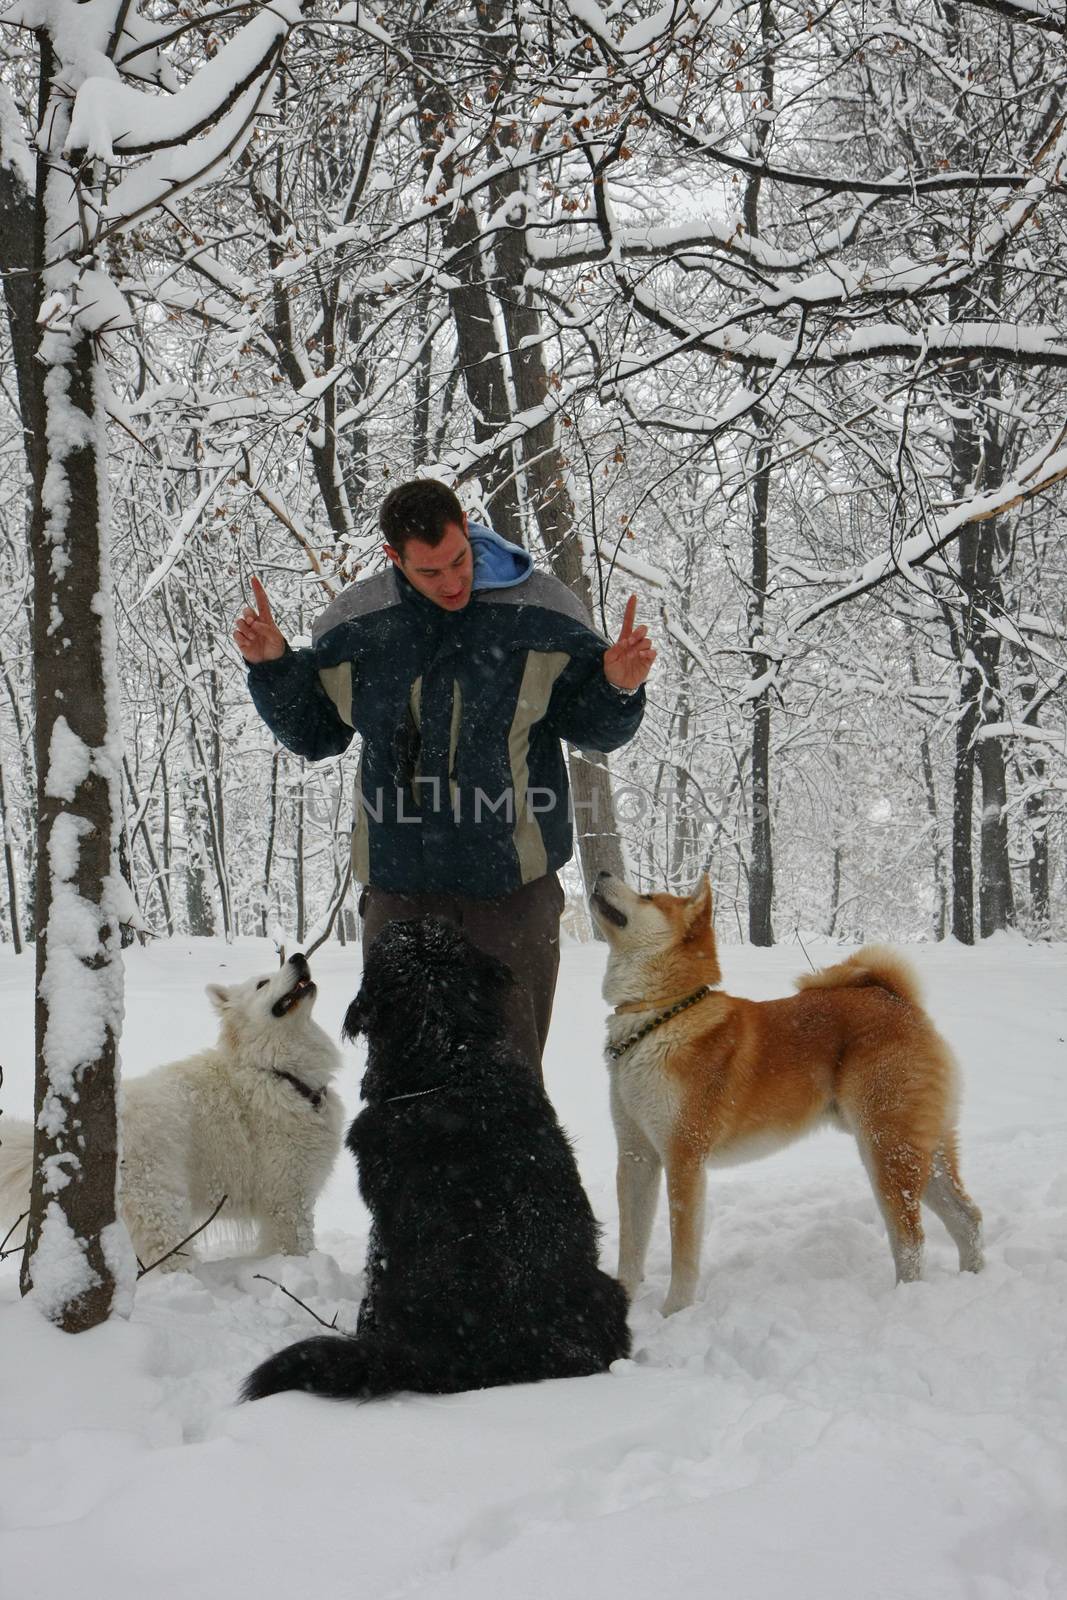 Man and dogs in the snow by tdjoric